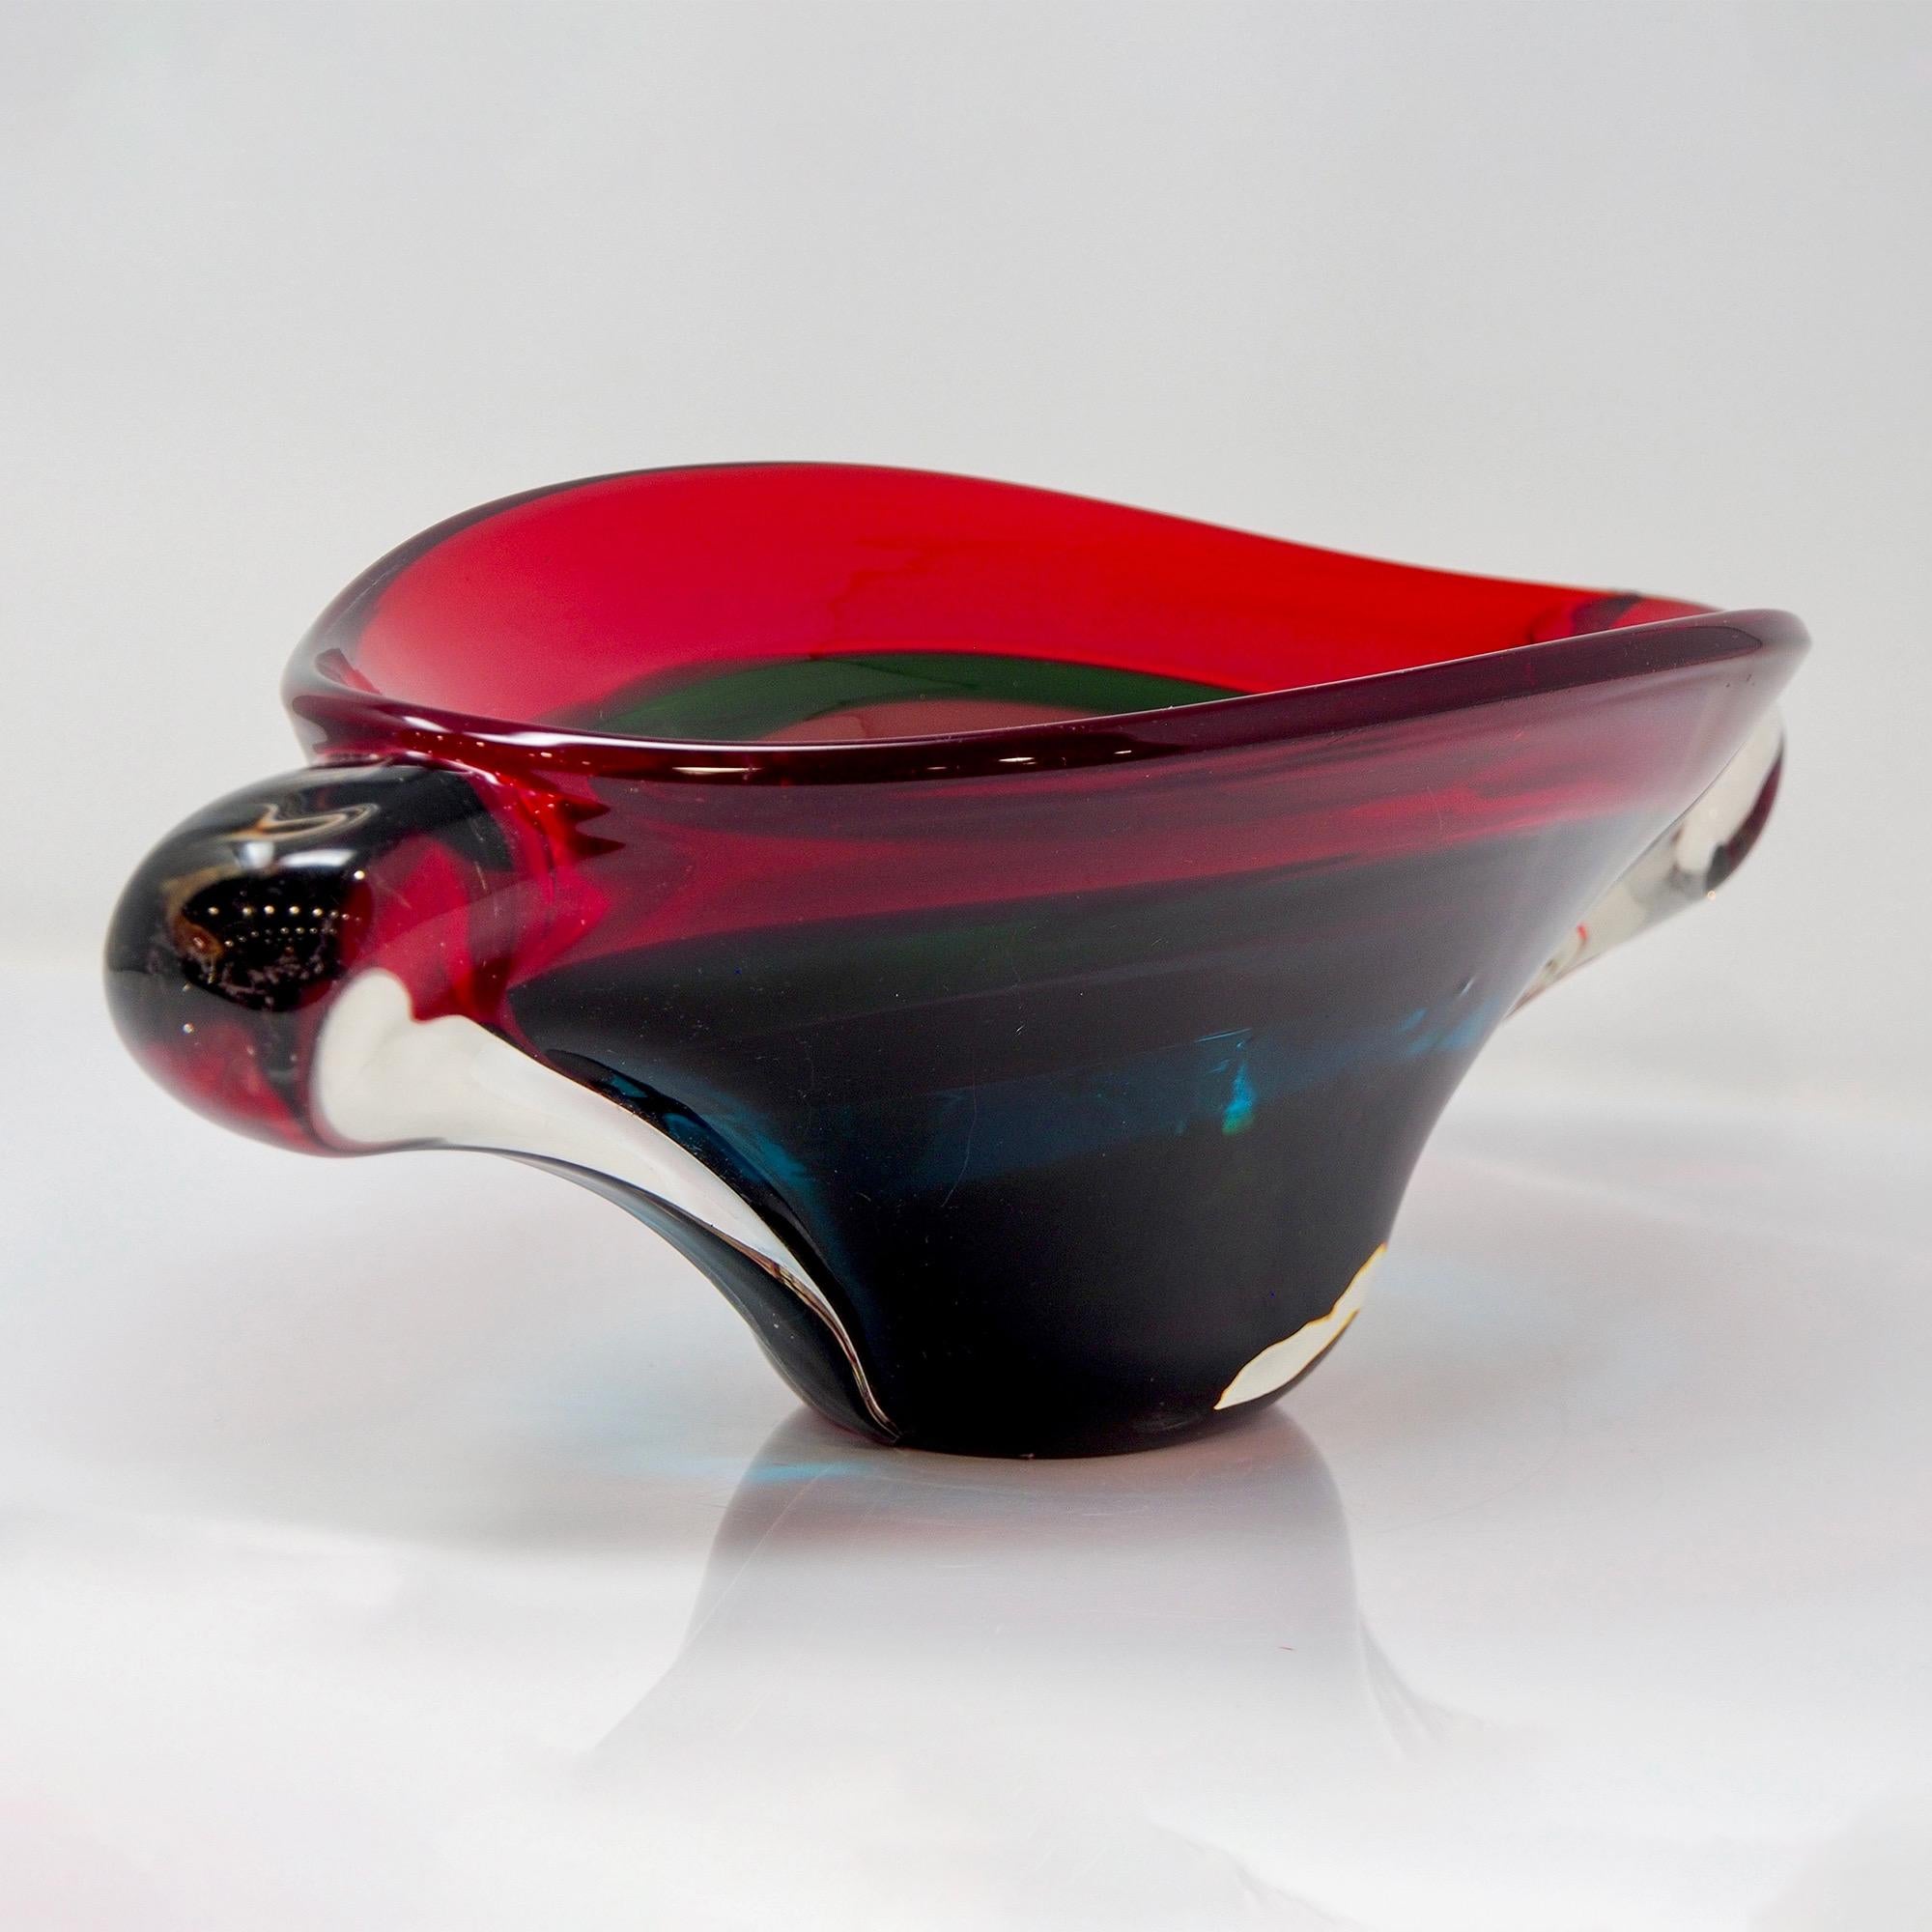 Circa late 1960s / early 1970s large mid century Murano glass center bowl features heavy glass of layered colors: red, green, smoky purple, blue and deep amethyst at the base with thick, clear winged handles at the sides. At just under 20” wide,